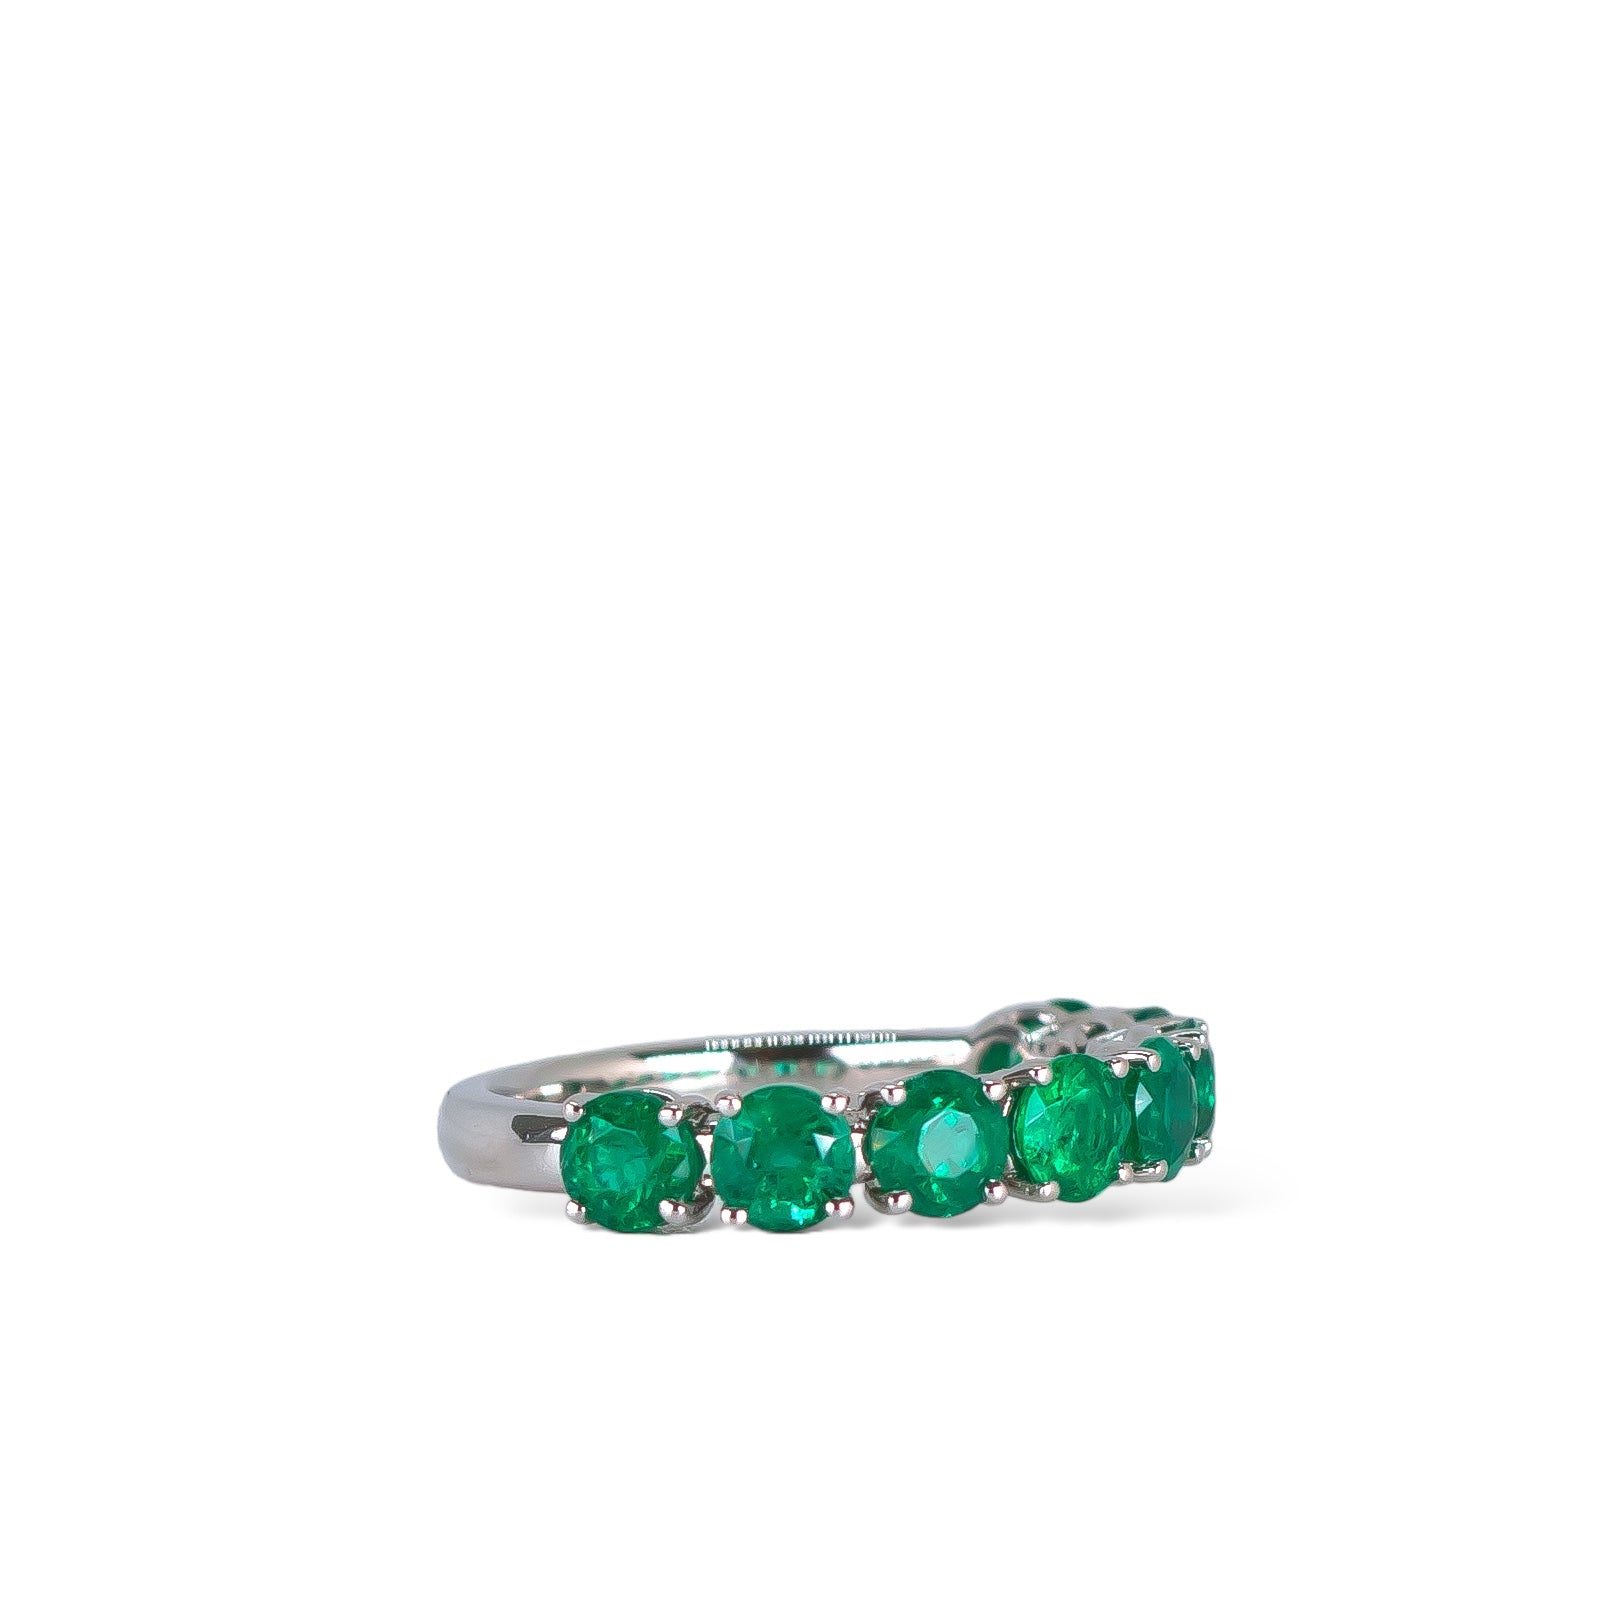 2.77 carat green emerald eternity ring in platinum by Valentina Fine Jewellery Hong Kong USA